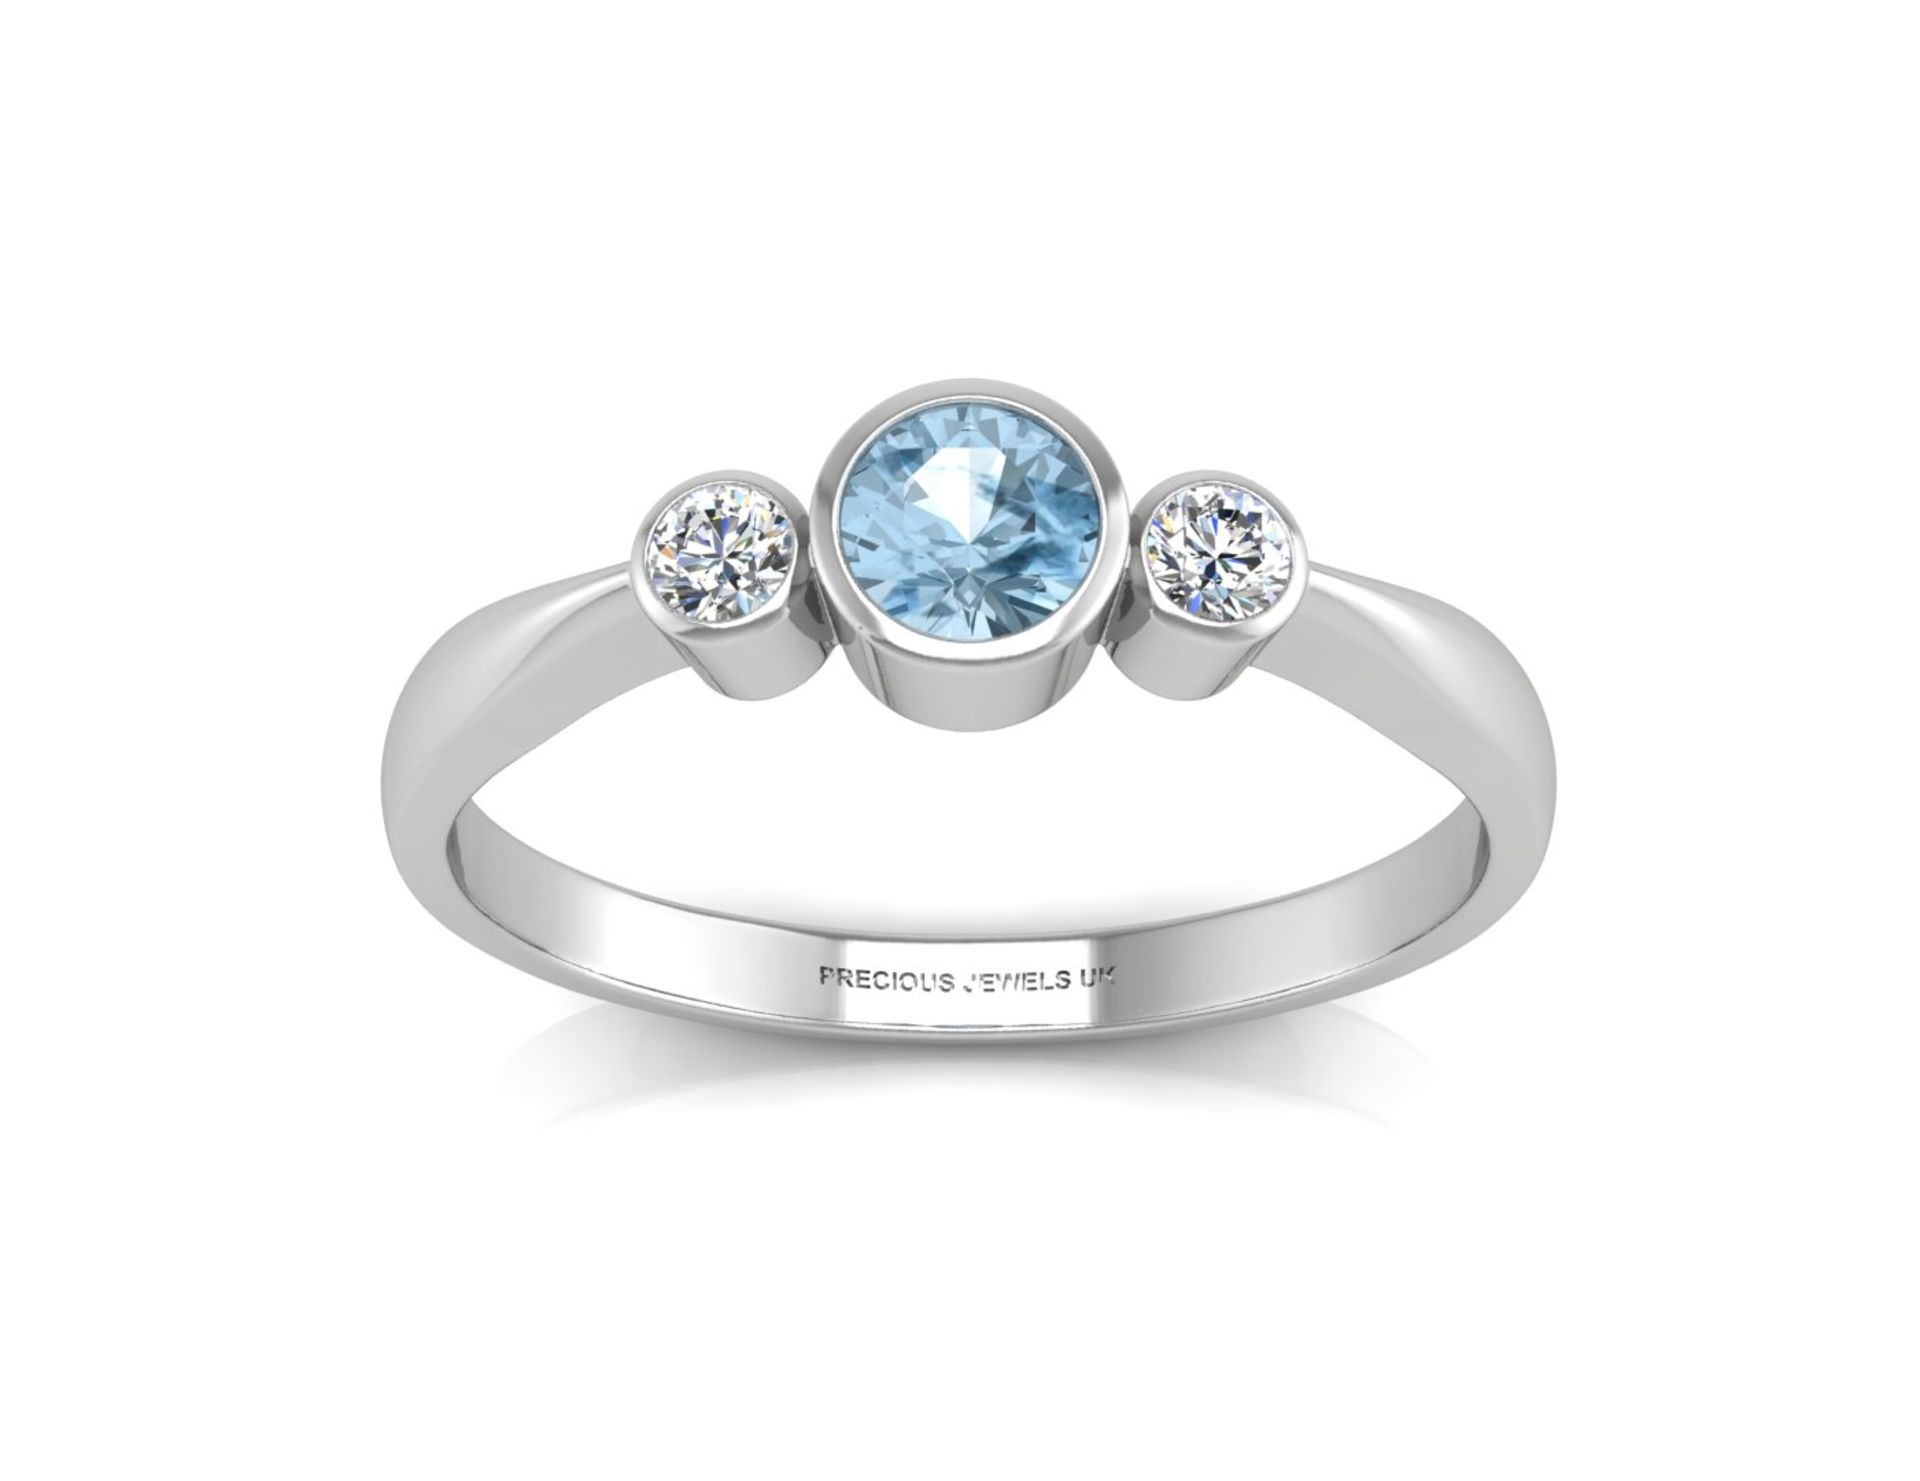 9ct White Gold Three Stone Diamond And Blue Topaz Ring 0.10 Carats - Valued by AGI £990.00 - One - Image 3 of 4